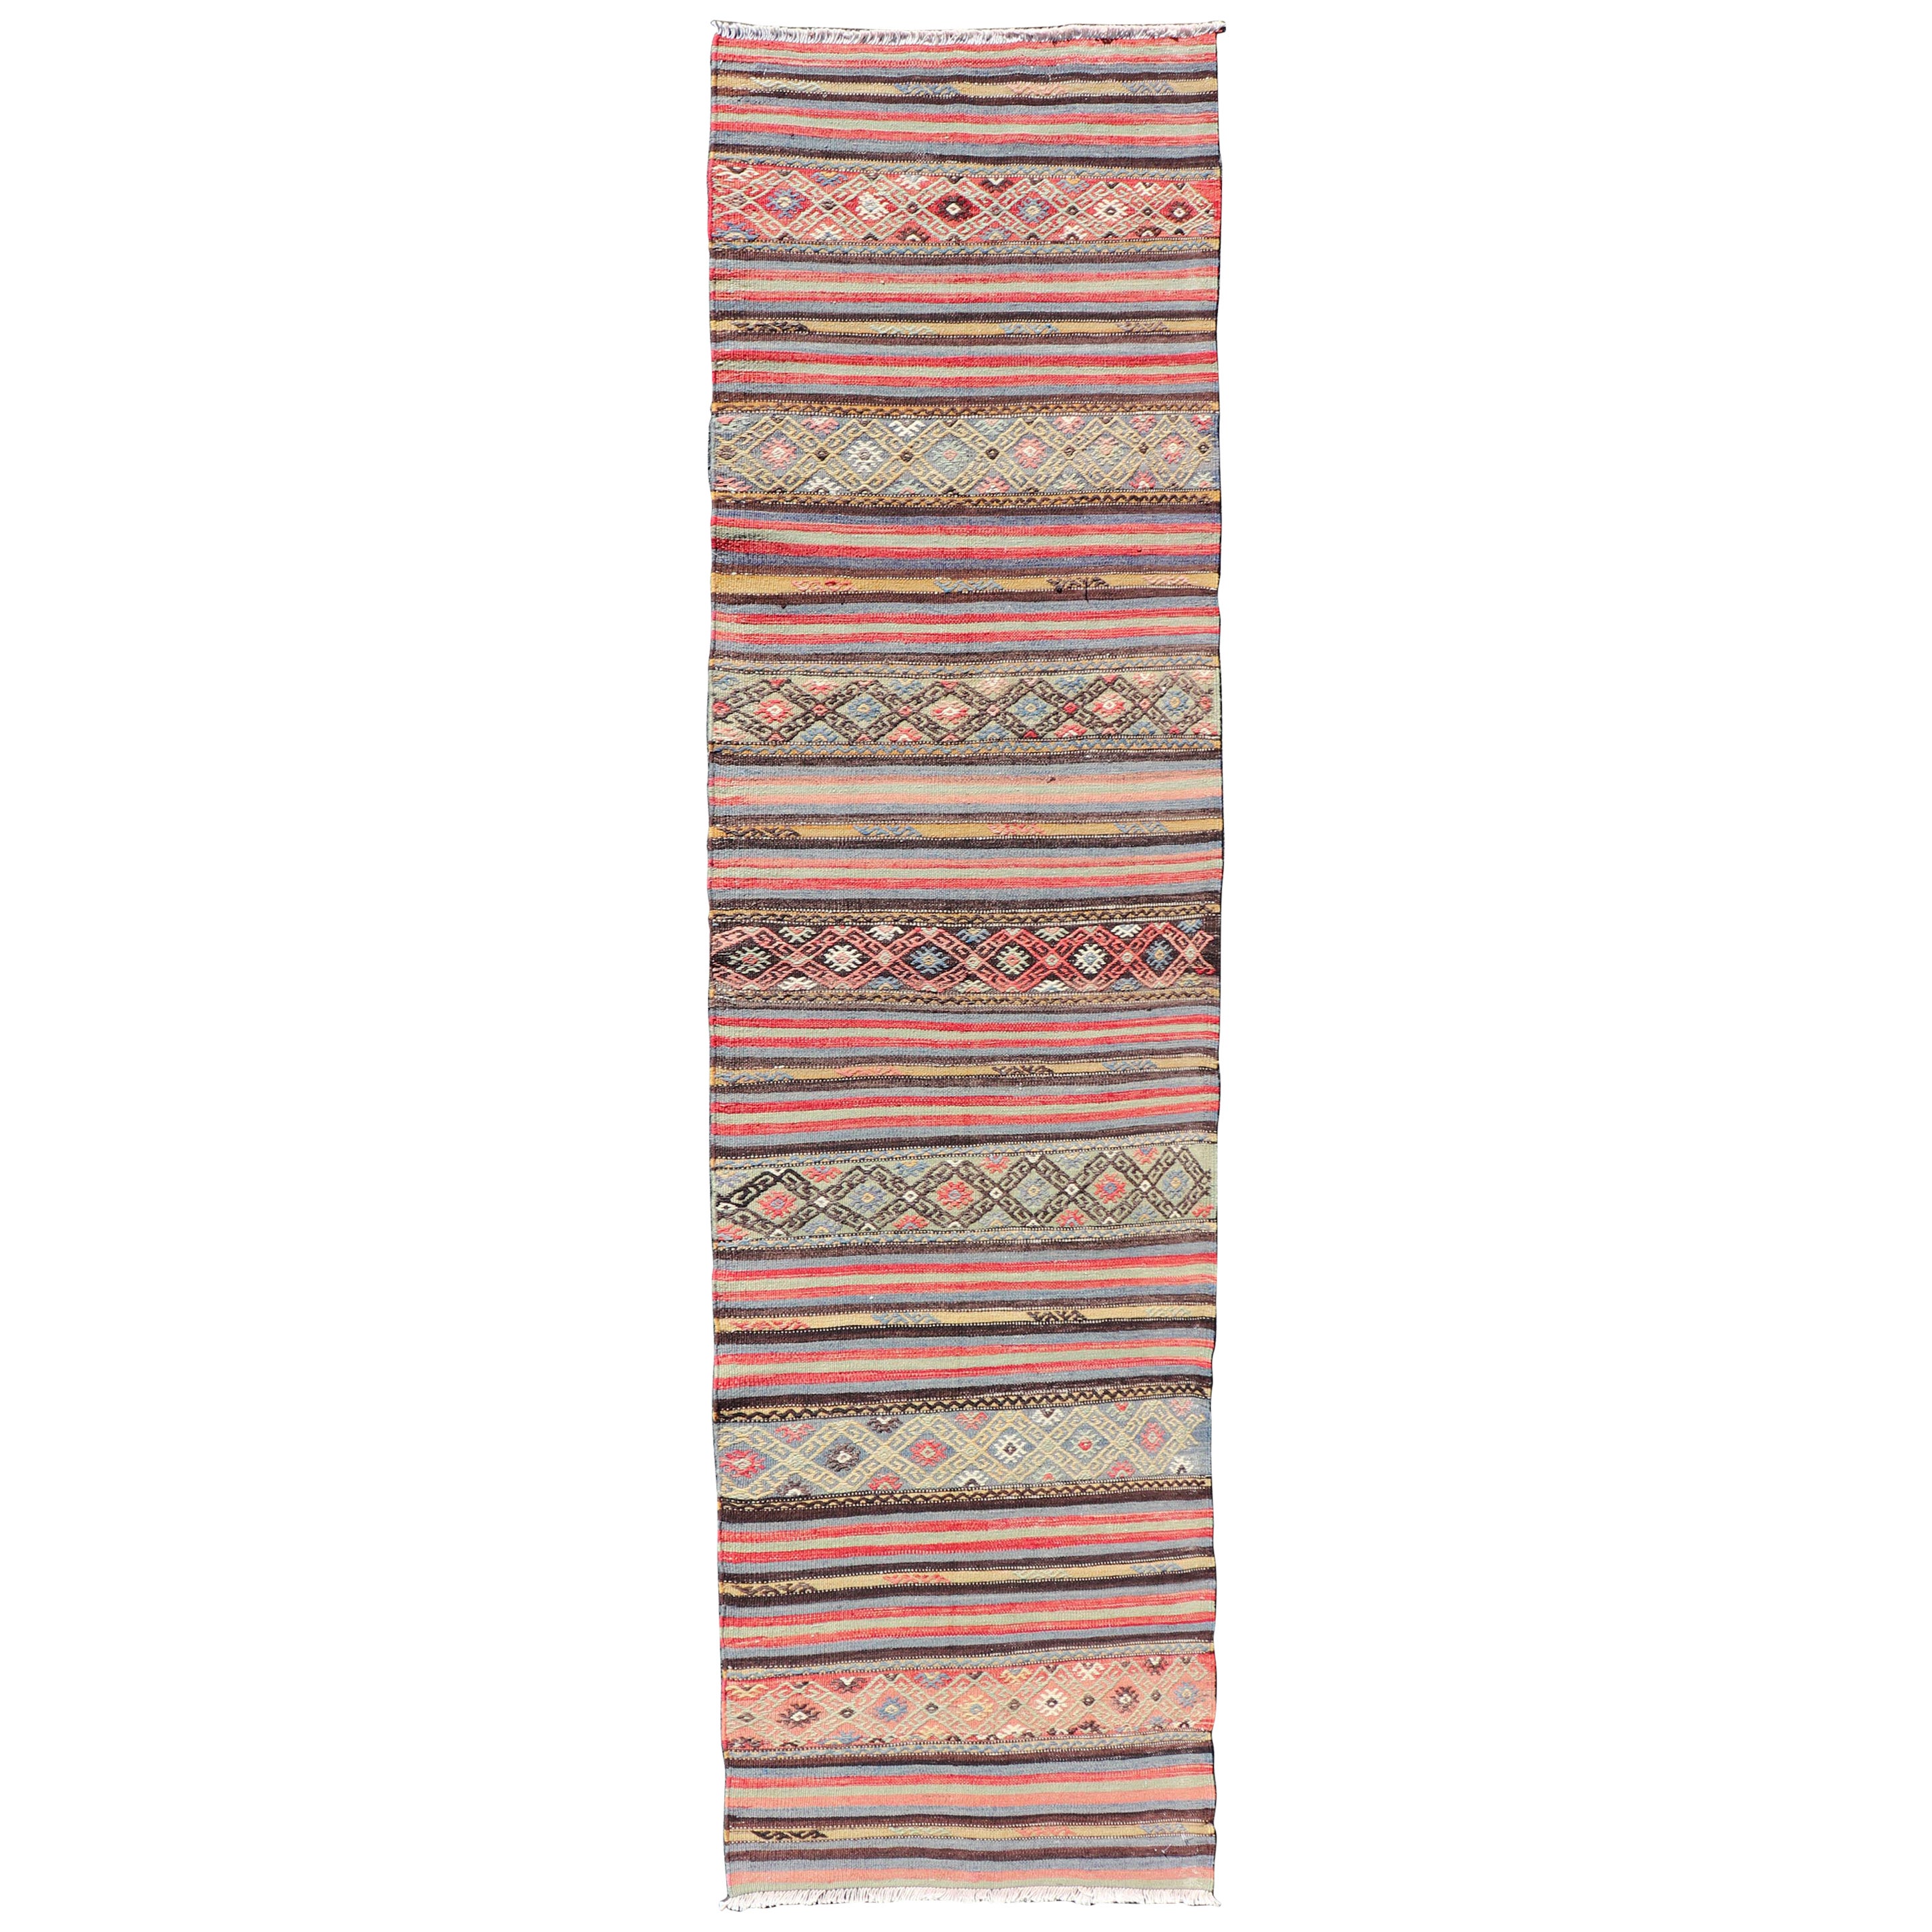 Vintage Turkish Kilim with Horizontal Stripes and Tribal Motifs in Bright Tones